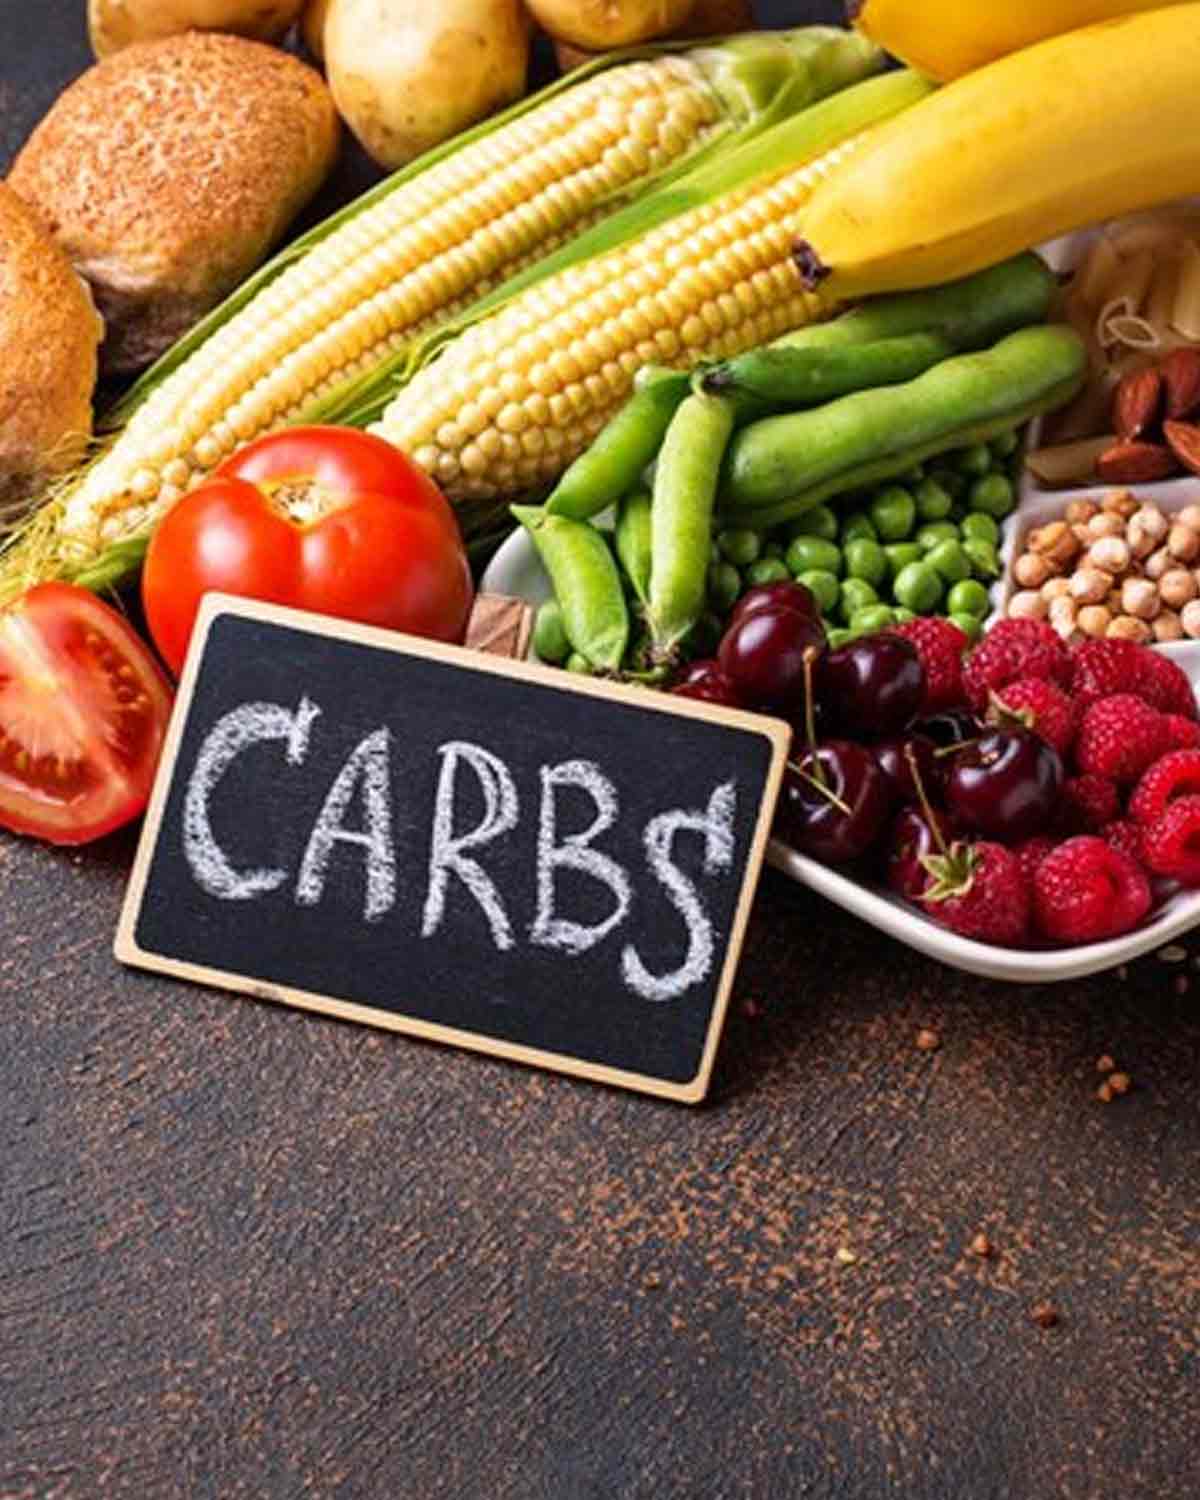 reduce carbs intake for weight loss tips